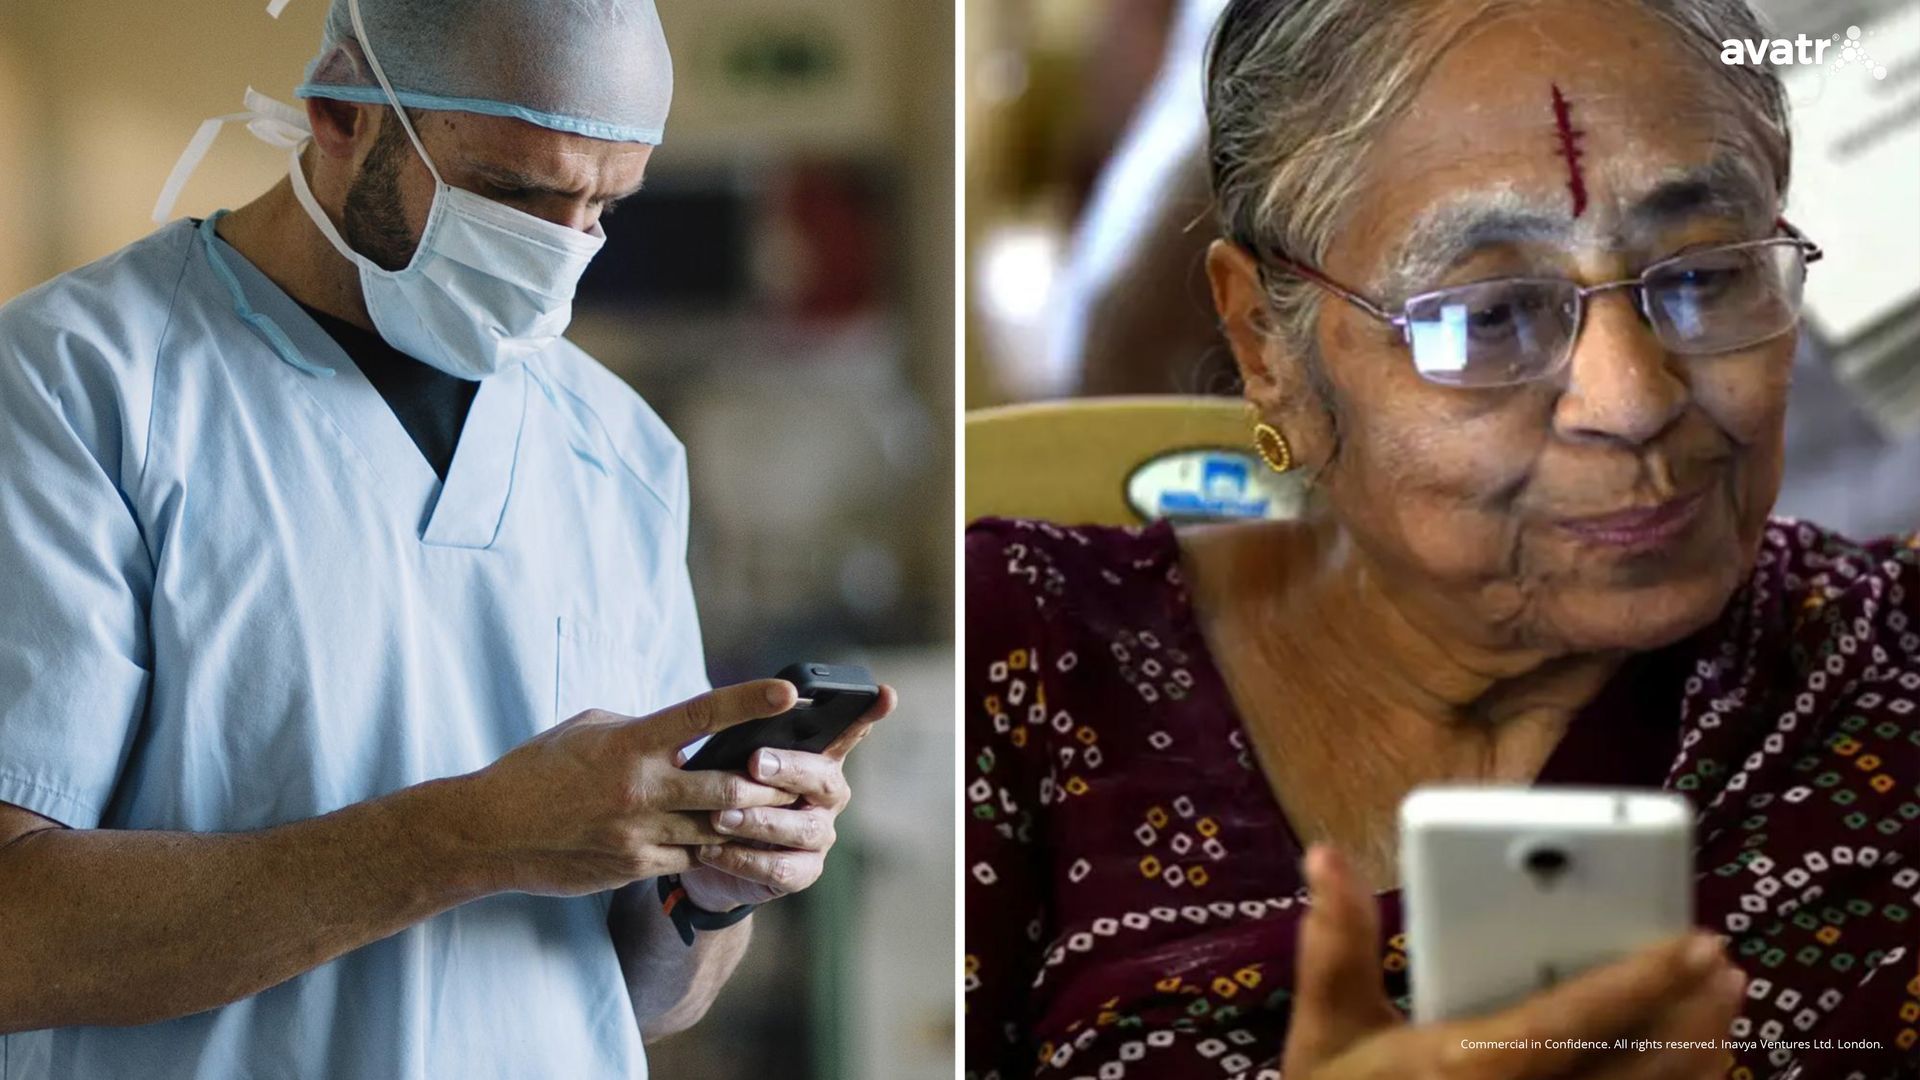 a doctor and an elderly woman are looking at their phones